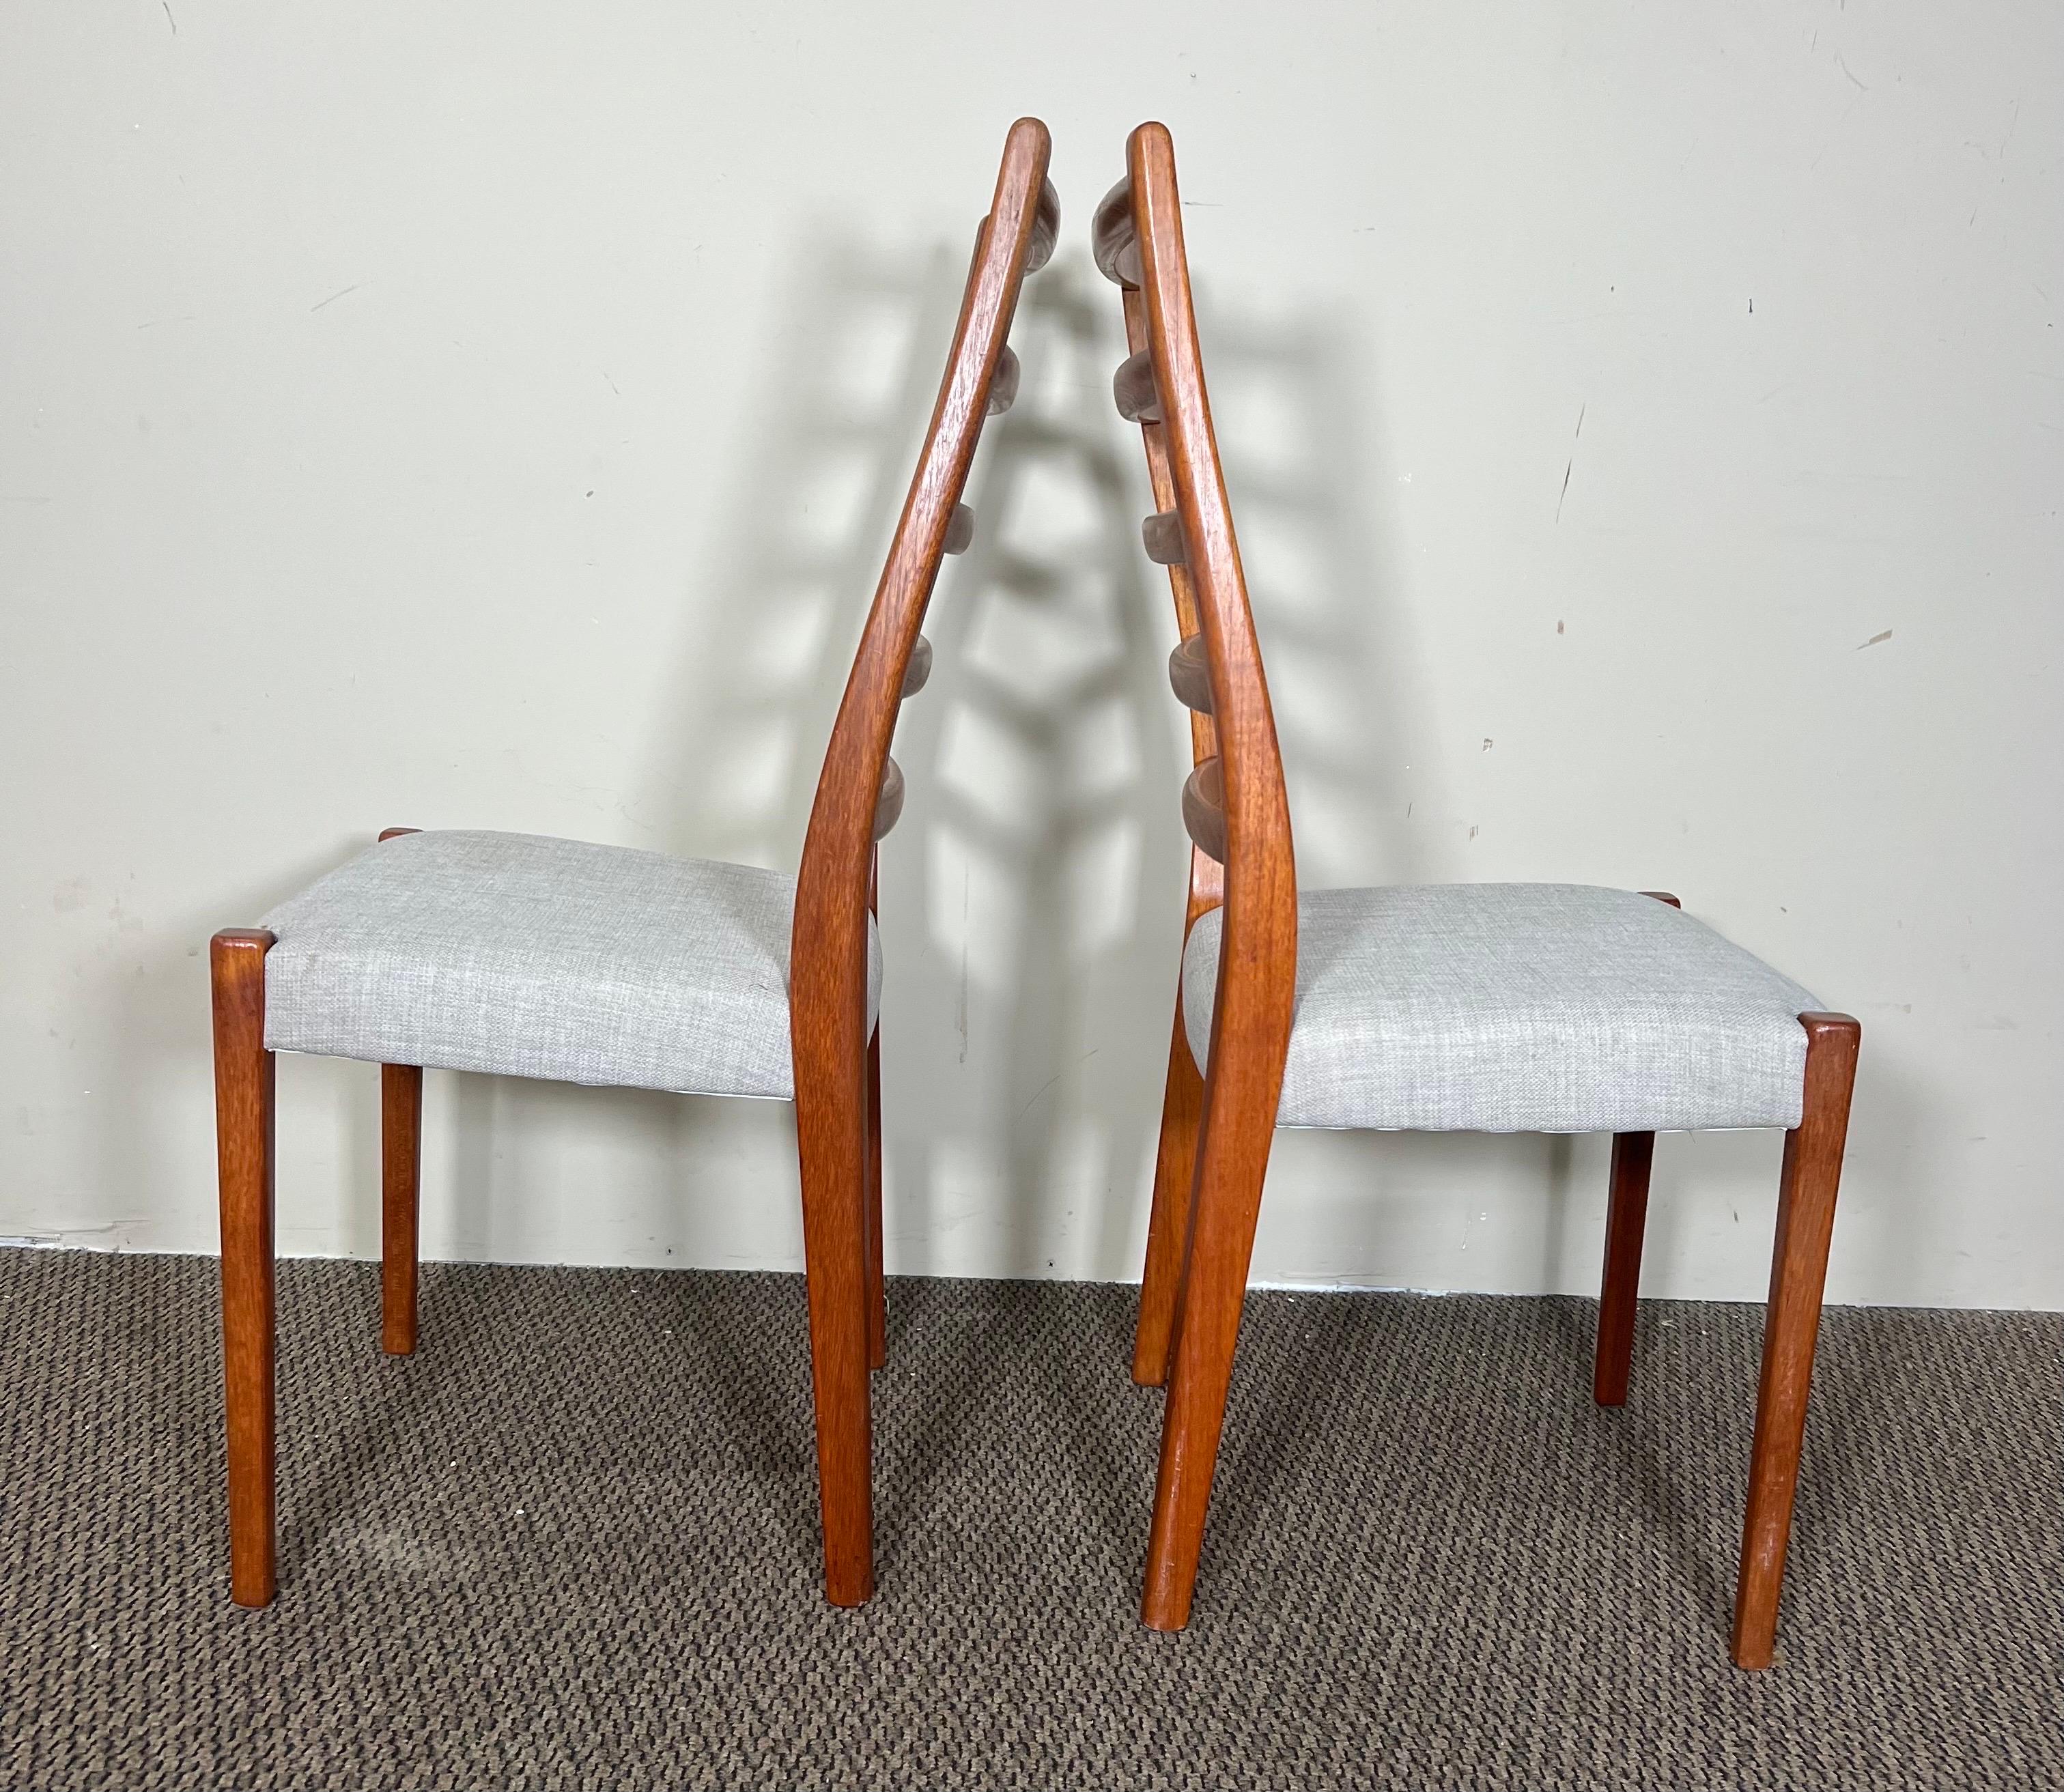 Gorgeous set of 6 ladder back teak dining chairs. Made by Svegards of Sweden. Teak frames with gray fabric seats. Recently reupholstered. 
Dimensions: 18” x 15.5” x 37.75” W x D x H
Seat height 18”
Very good condition. Some light scuffs and marks